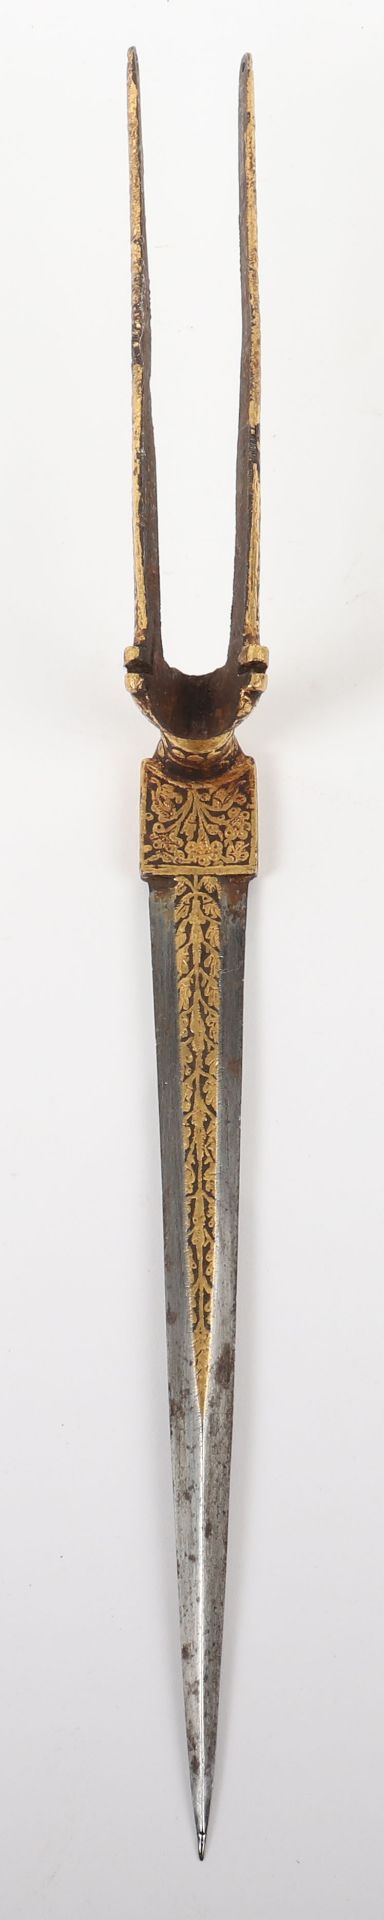 Rare Indian Bayonet Sangin Intended to be Bound to a Matchlock Gun Torador, 18th or 19th Century